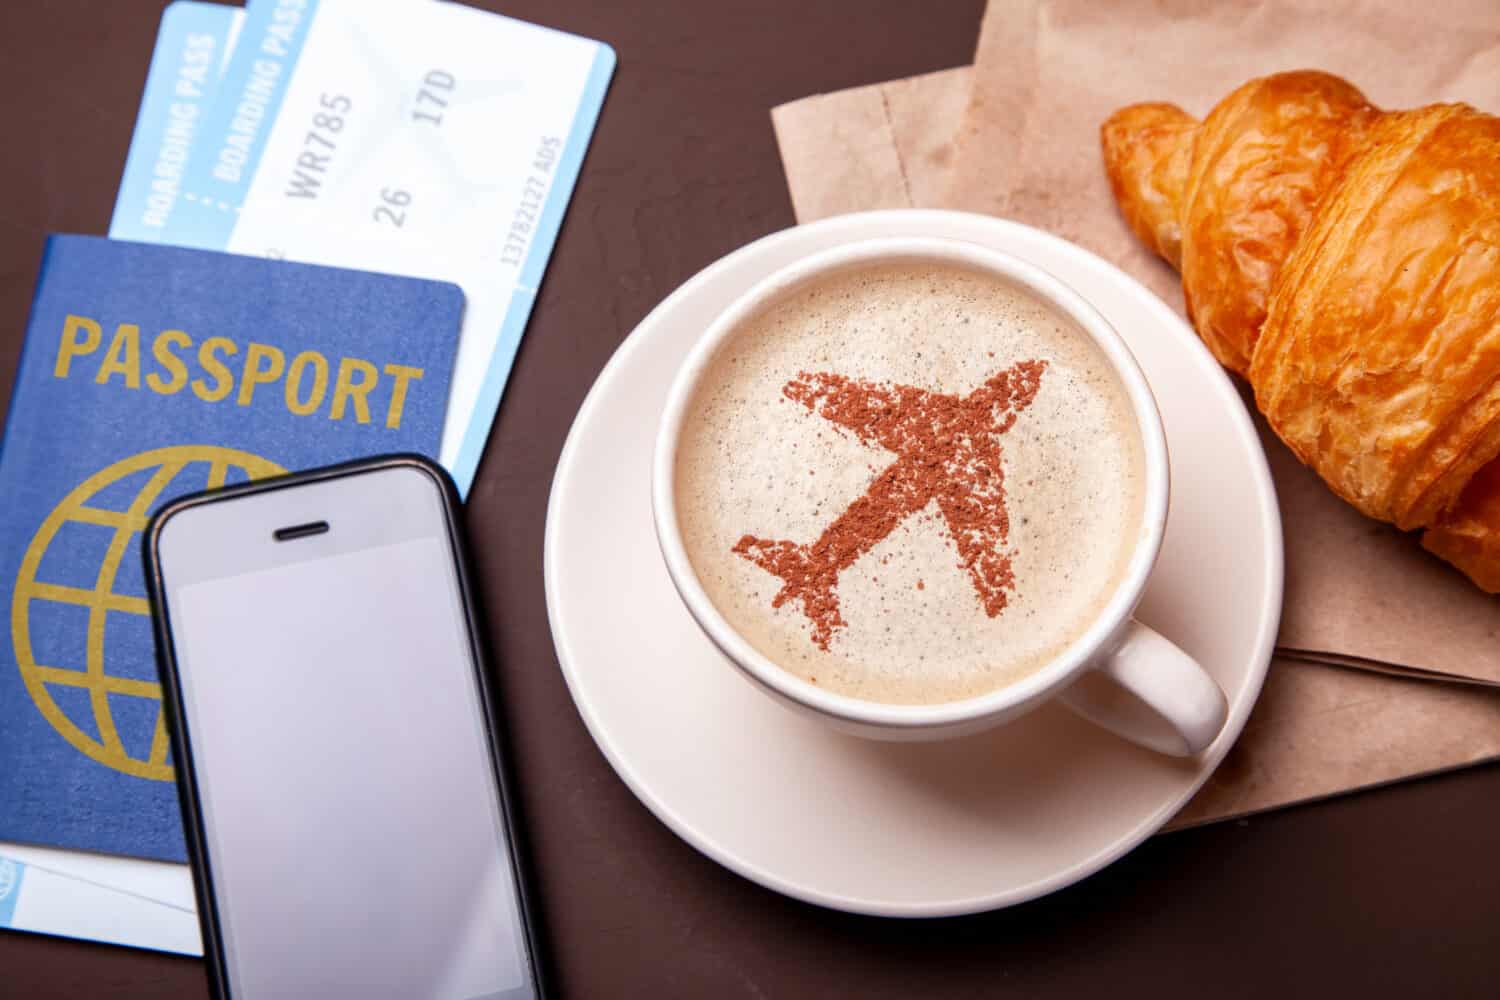 Mug of coffee with an airplane on the foam. Morning coffee with croissant in flight. Paspor and ticket with smrtrfonom and cup of coffee